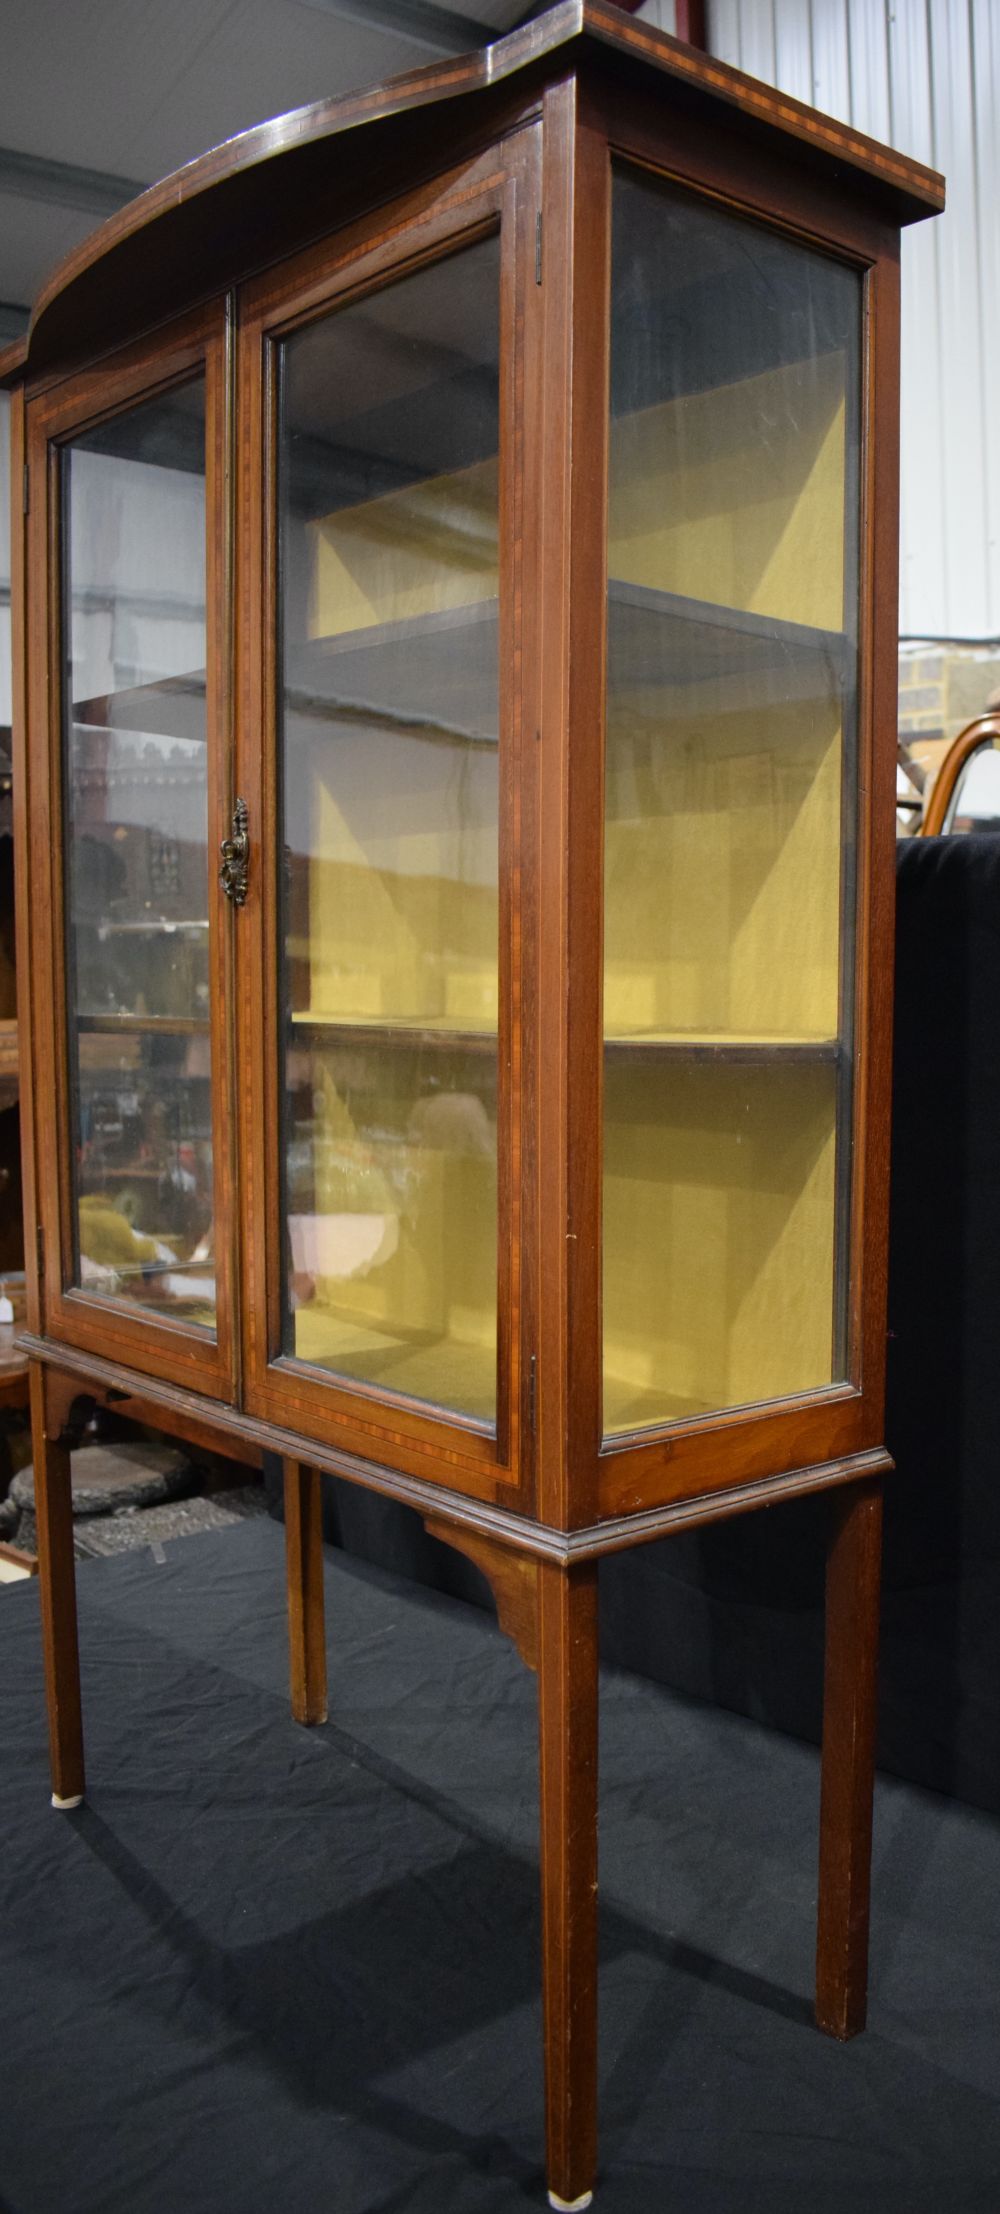 An Edwardian glass fronted inlaid display cabinet 120 x 76 x 34 cm - Image 8 of 10